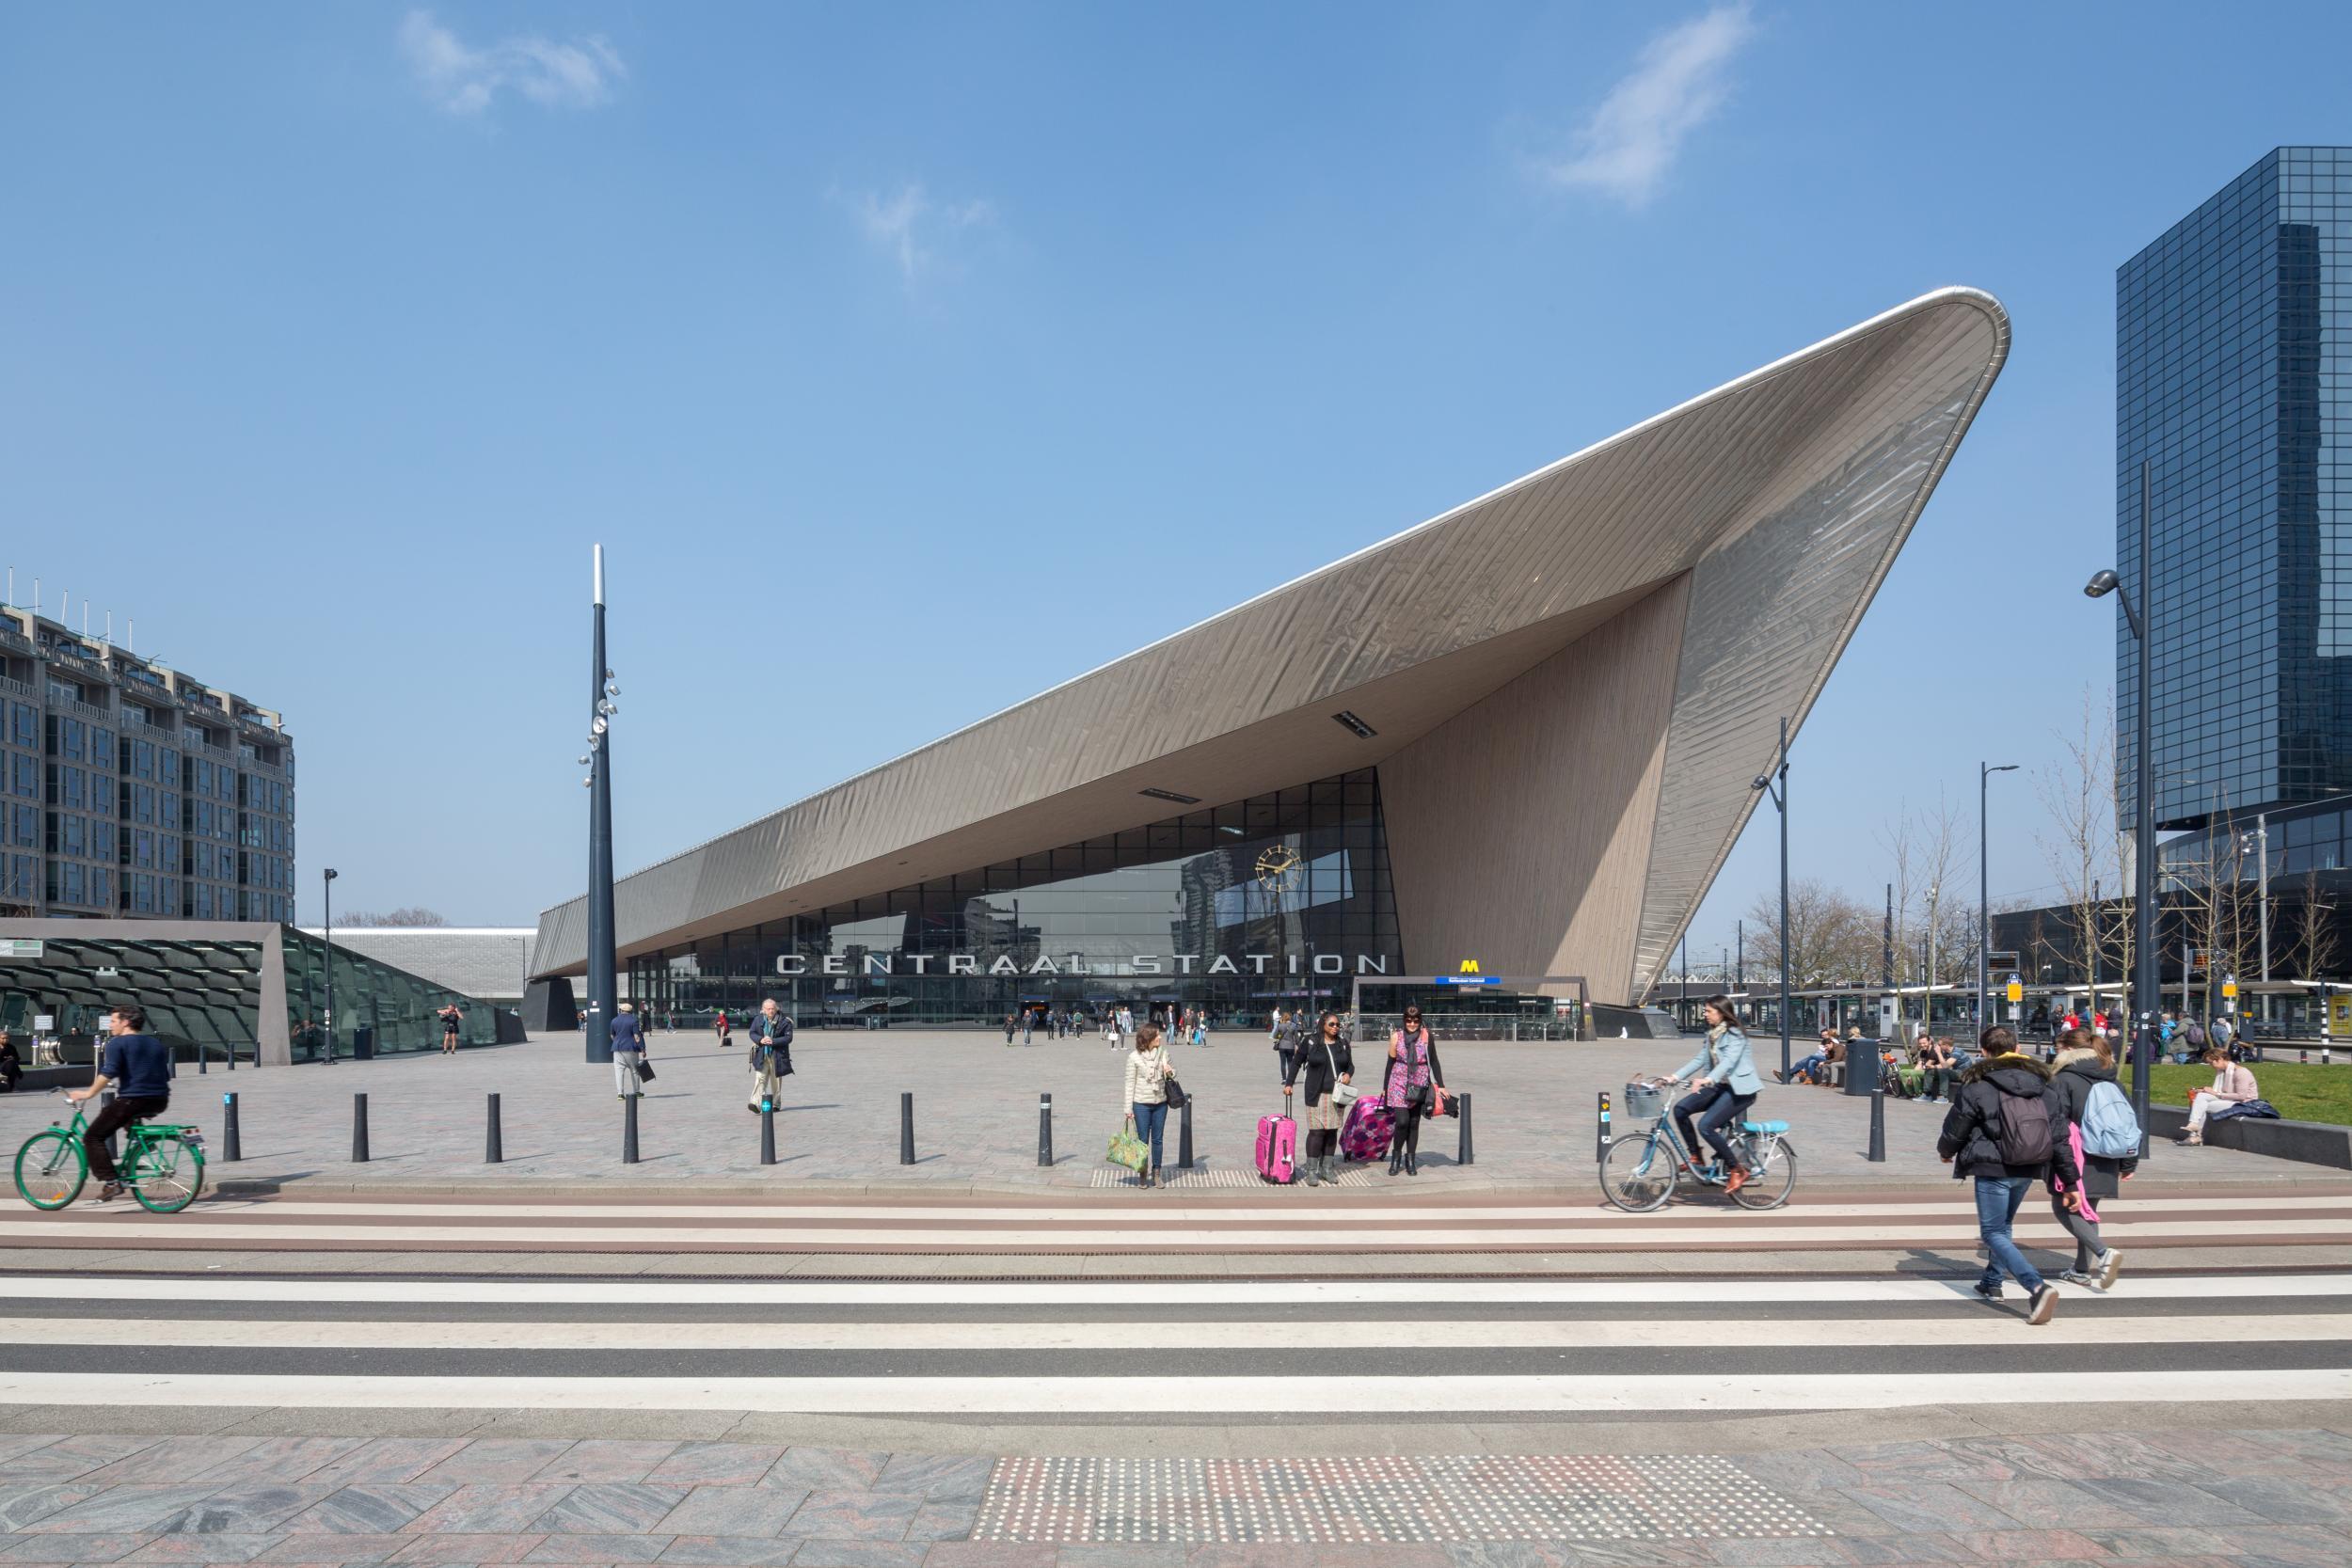 The distinctive Centraal Station